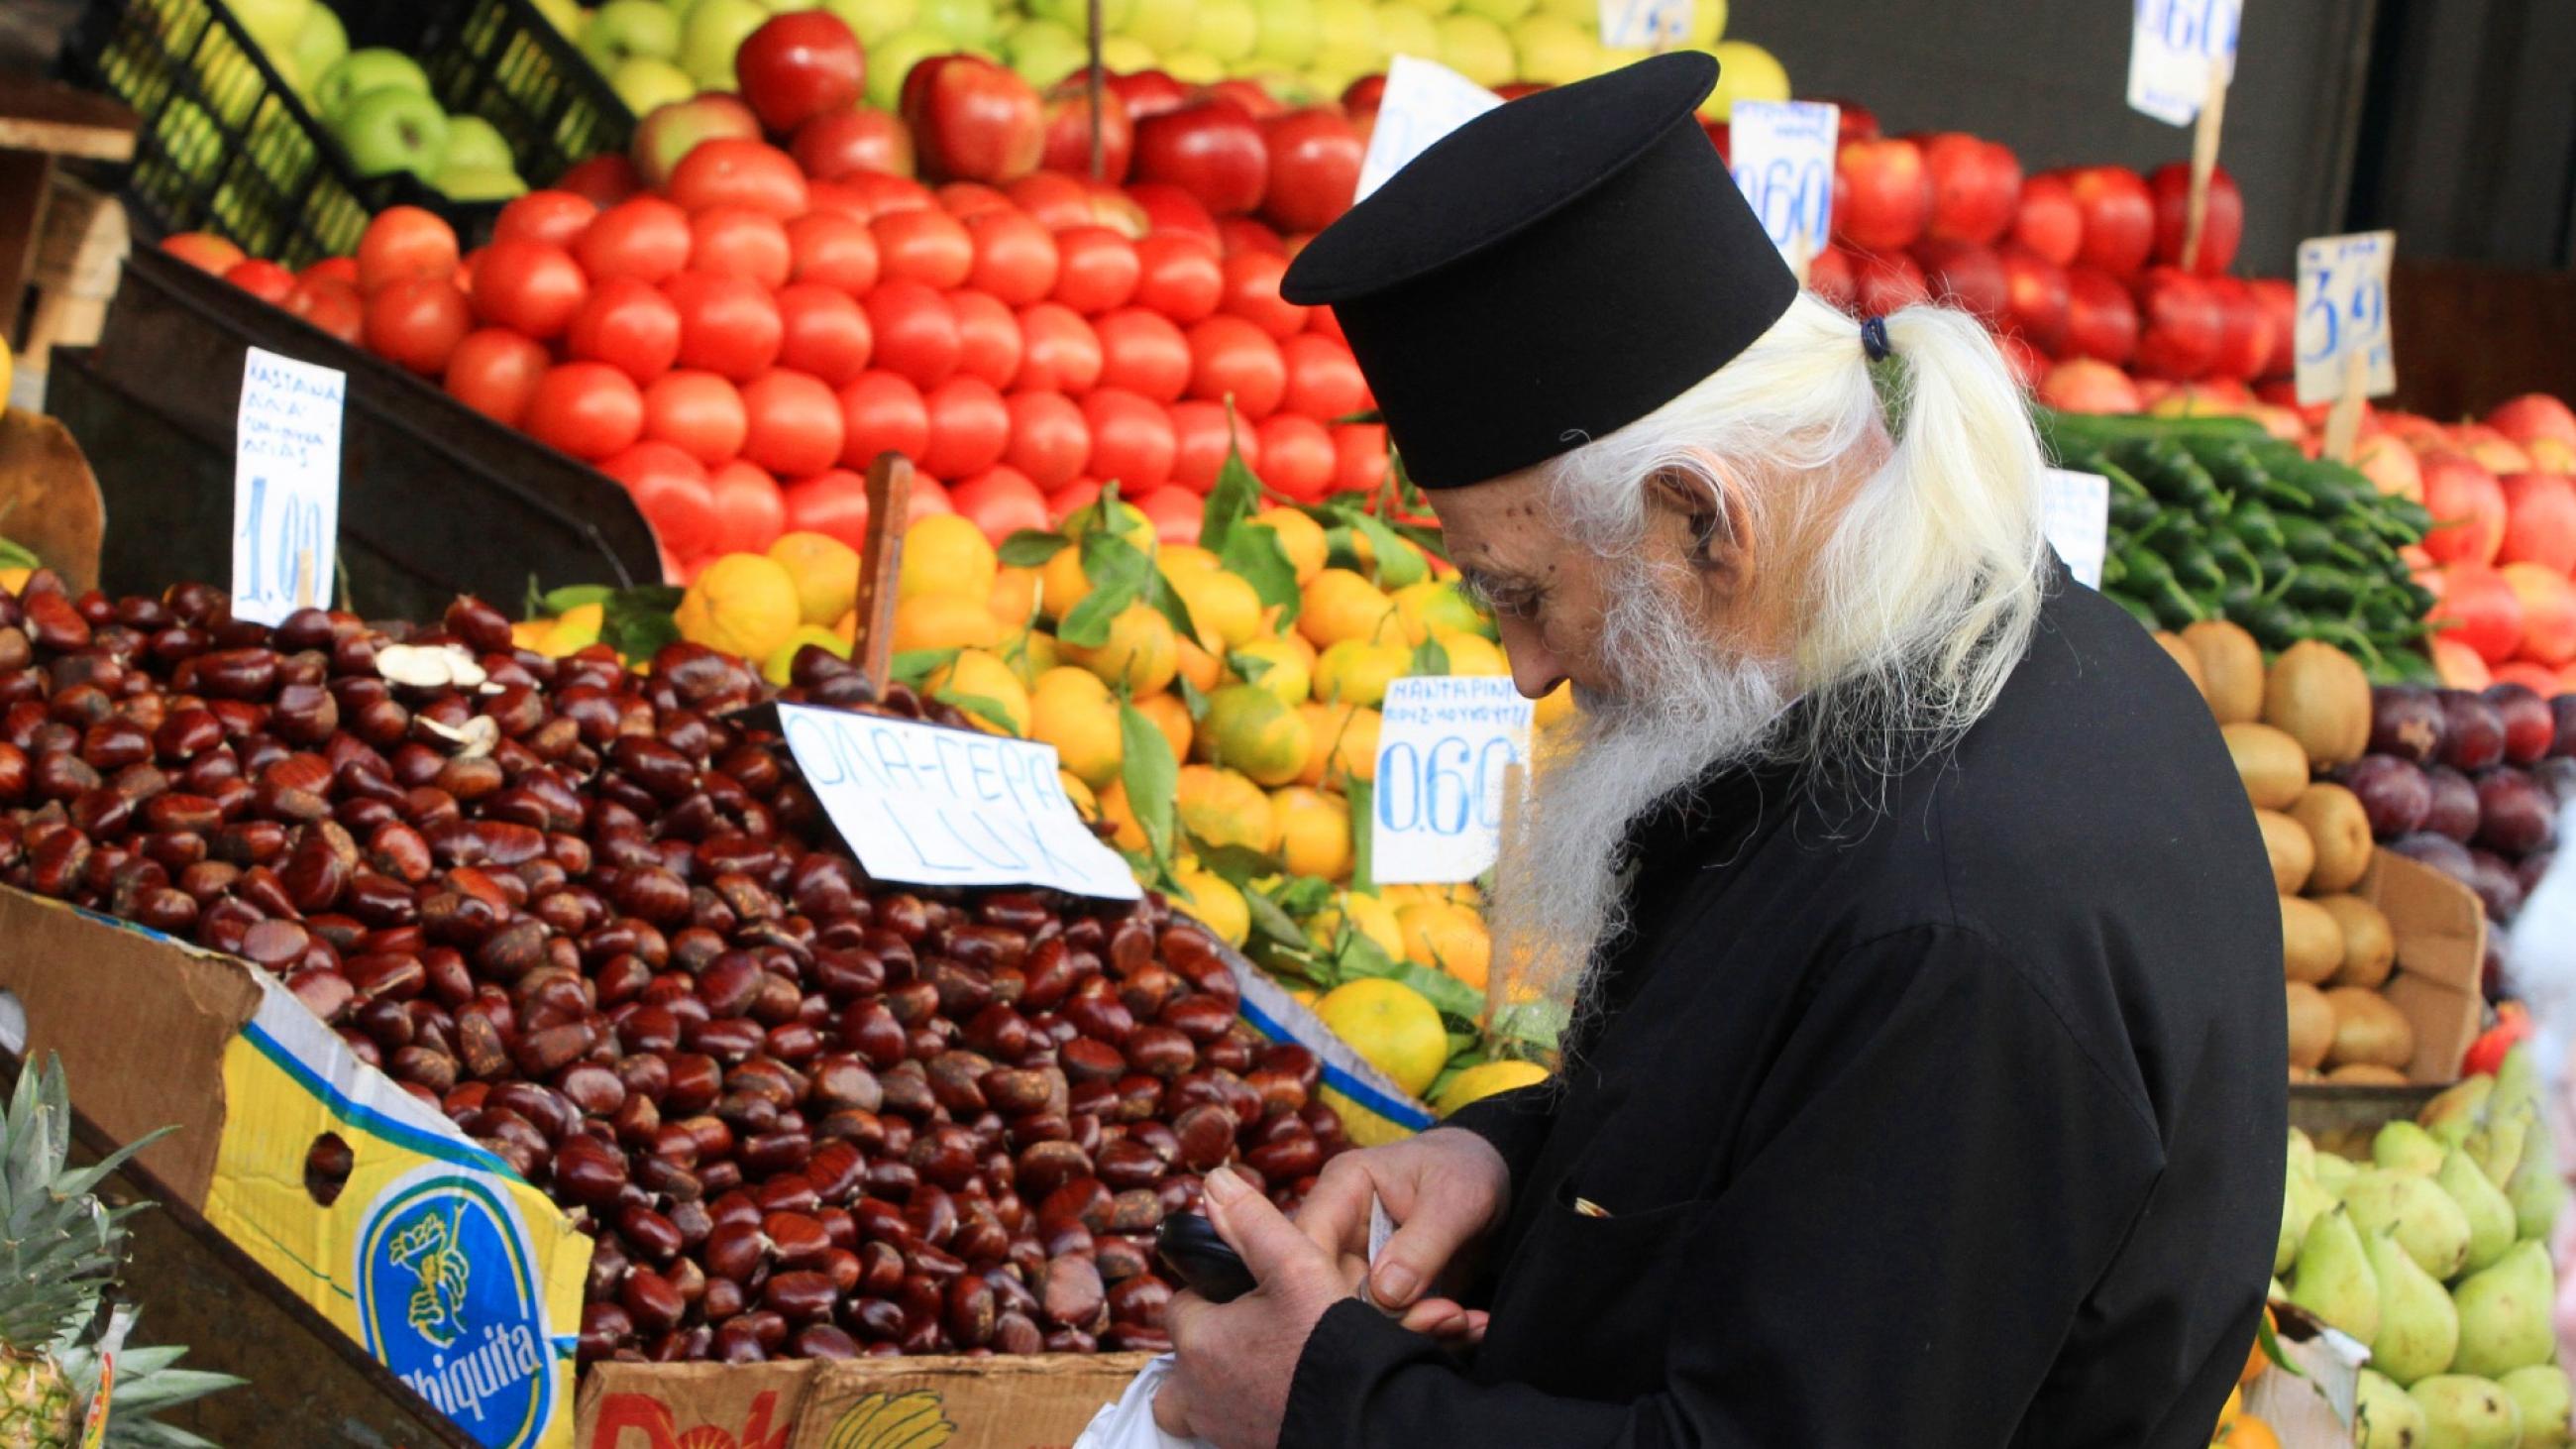 An orthodox priest with a long white beard wearing traditional black robes and hat is seen examing fresh fruits and vegetables at a market stall